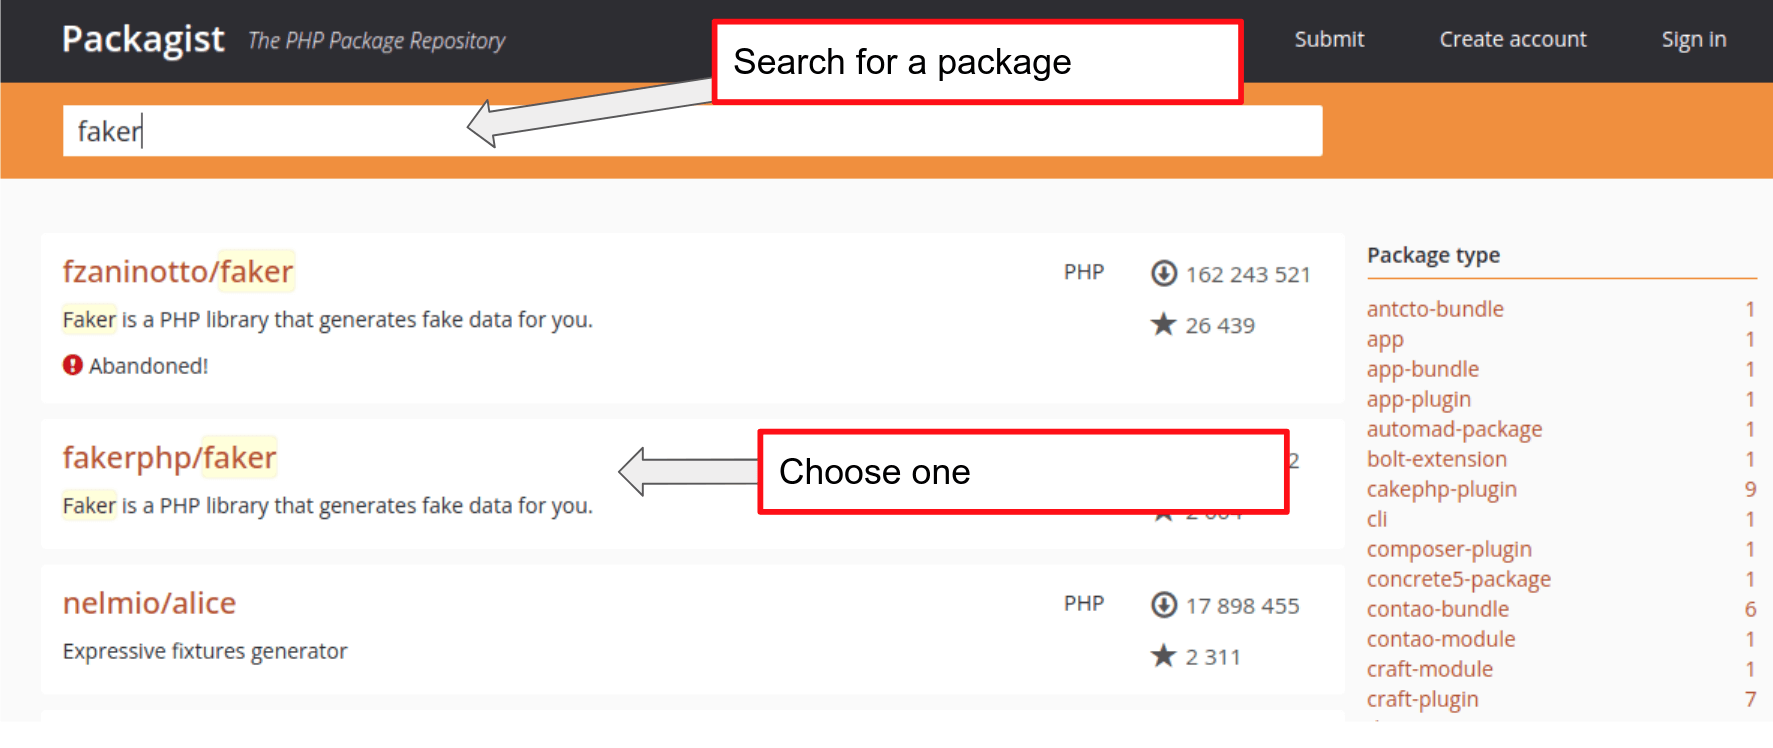 Search for a PHP package in the packagist.org website